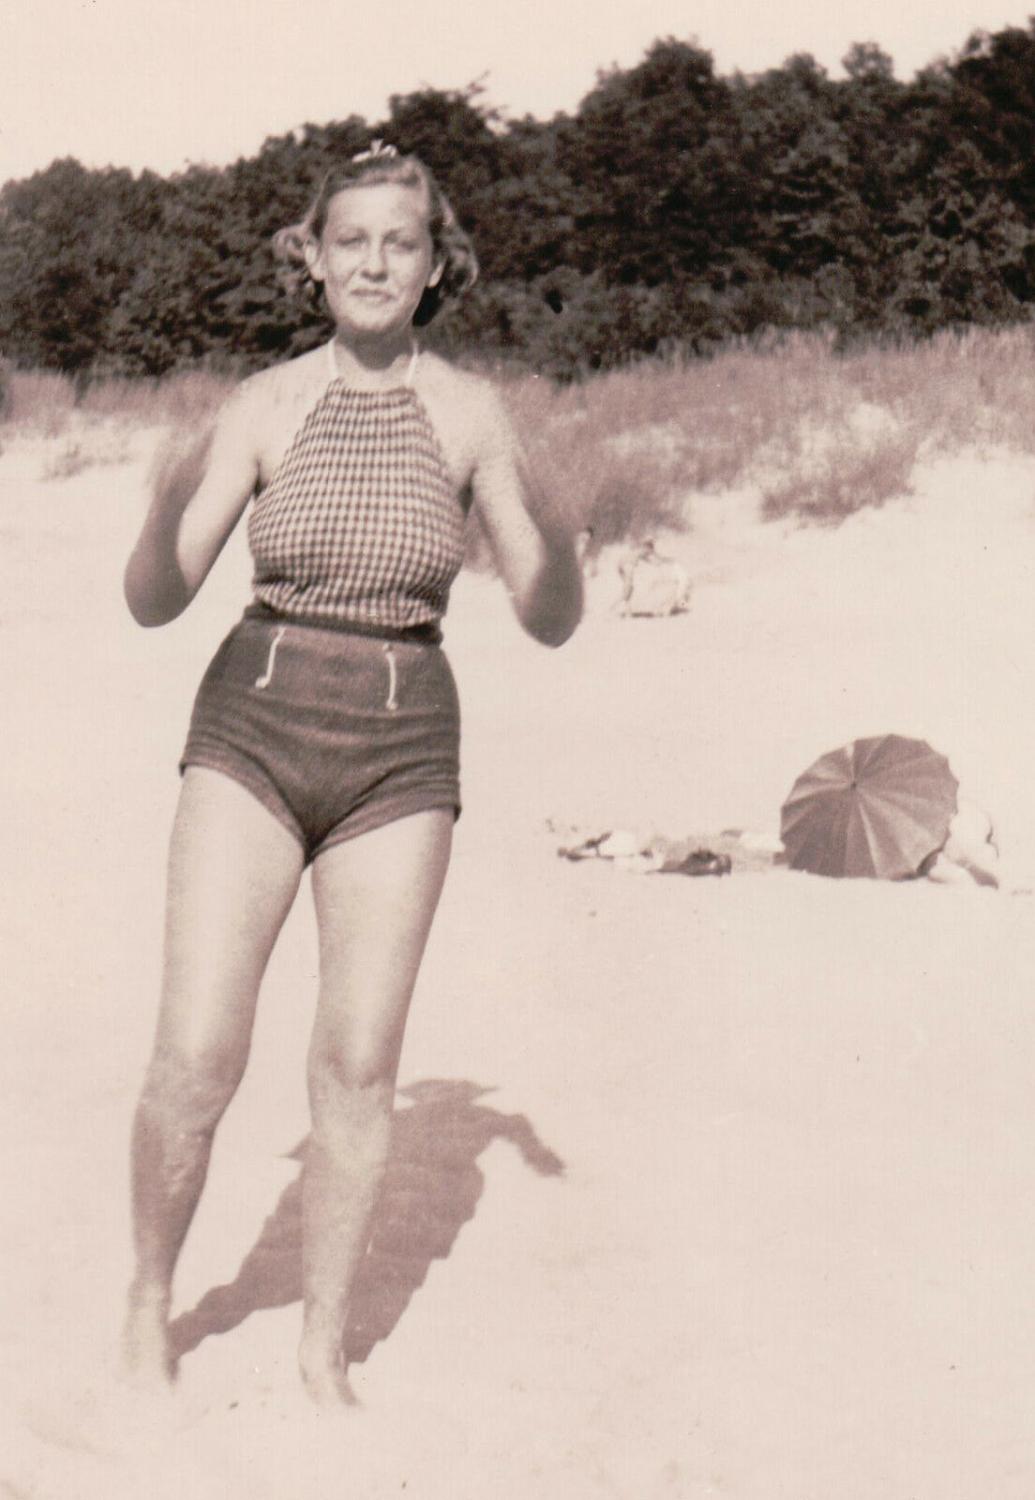 VINTAGE 1935 BLONDE BEACH BIKINI BUSTY UMBRELLA HIDING LADY FUNNY OLD FUN  PHOTO: Signed by Author(s) Photograph | 21 East Gallery